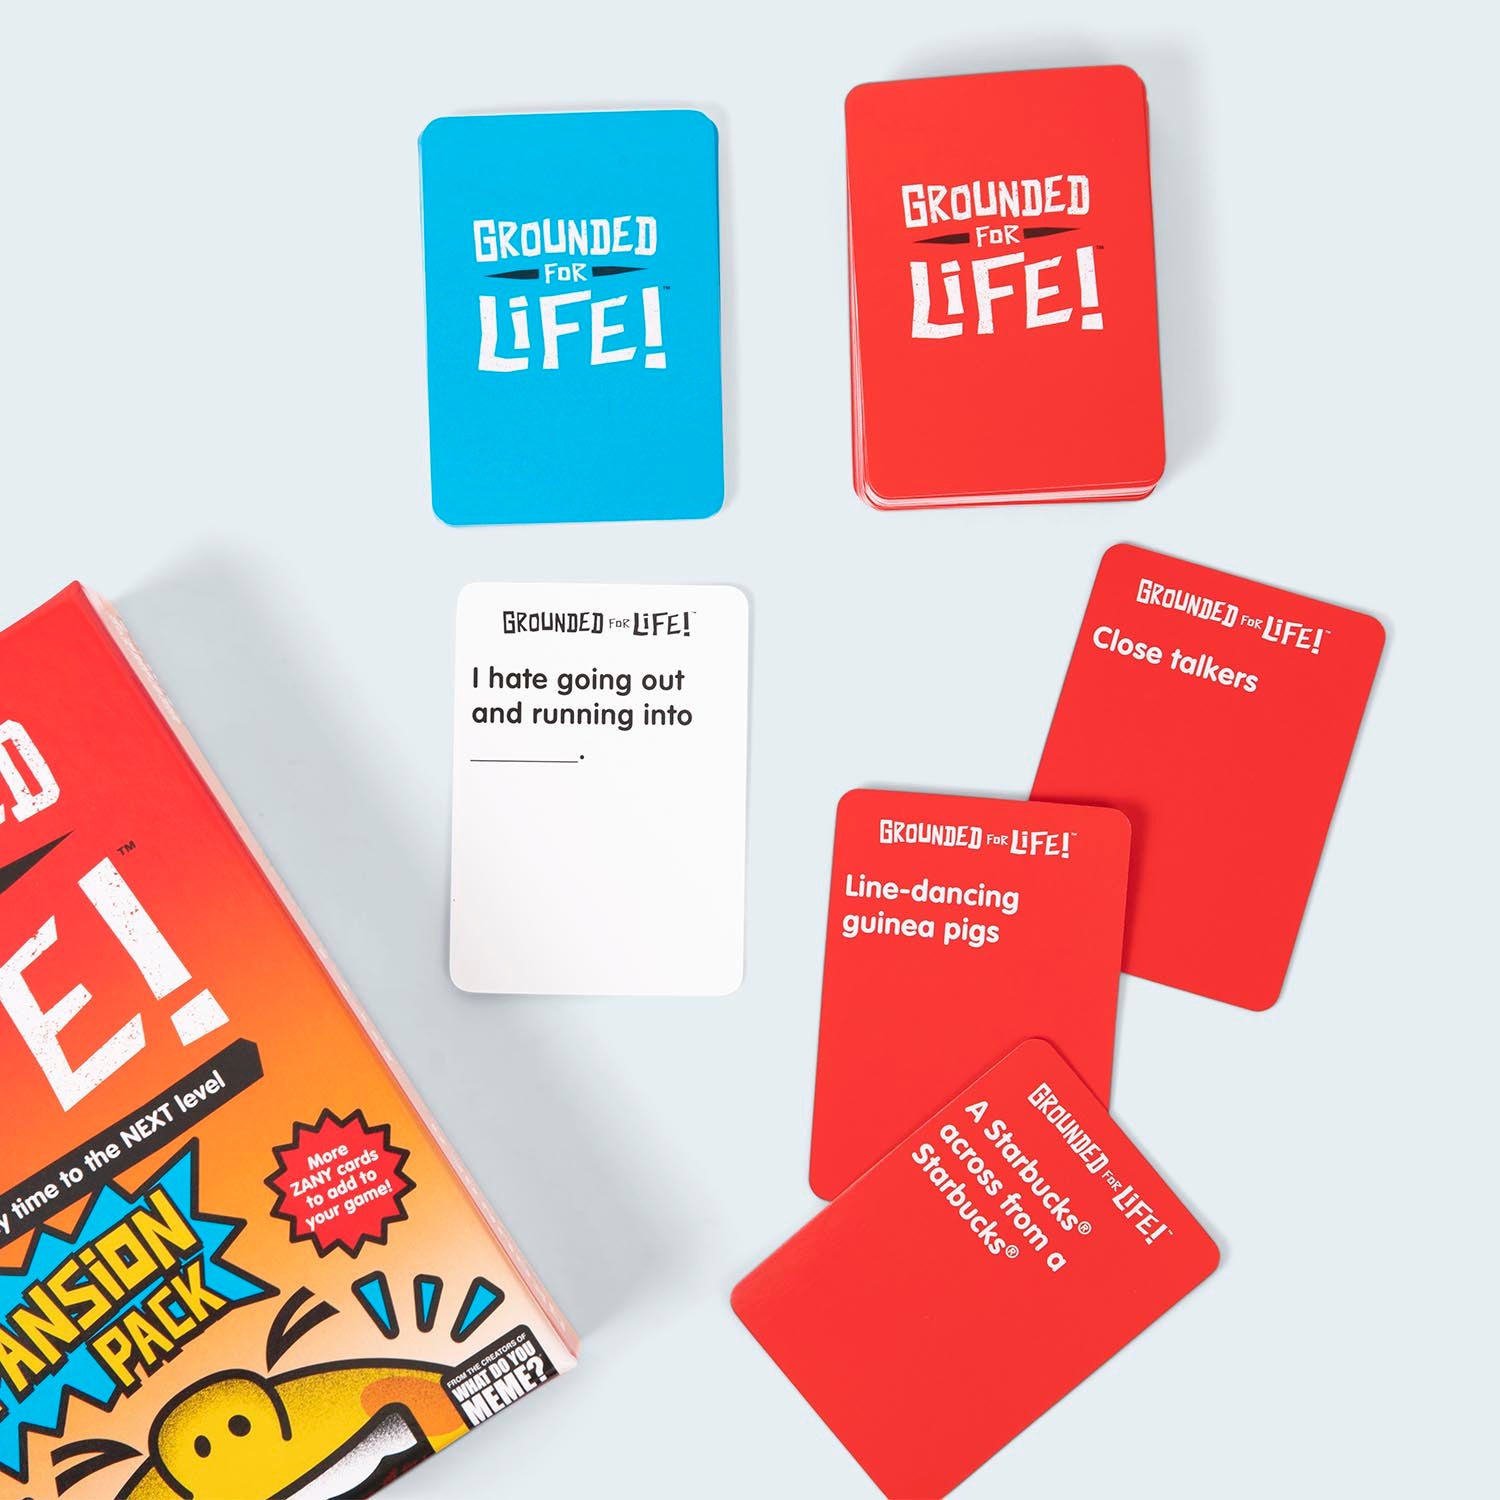 grounded-for-life-expansion-pack-game-box-and-game-play-09-what-do-you-meme-by-relatable